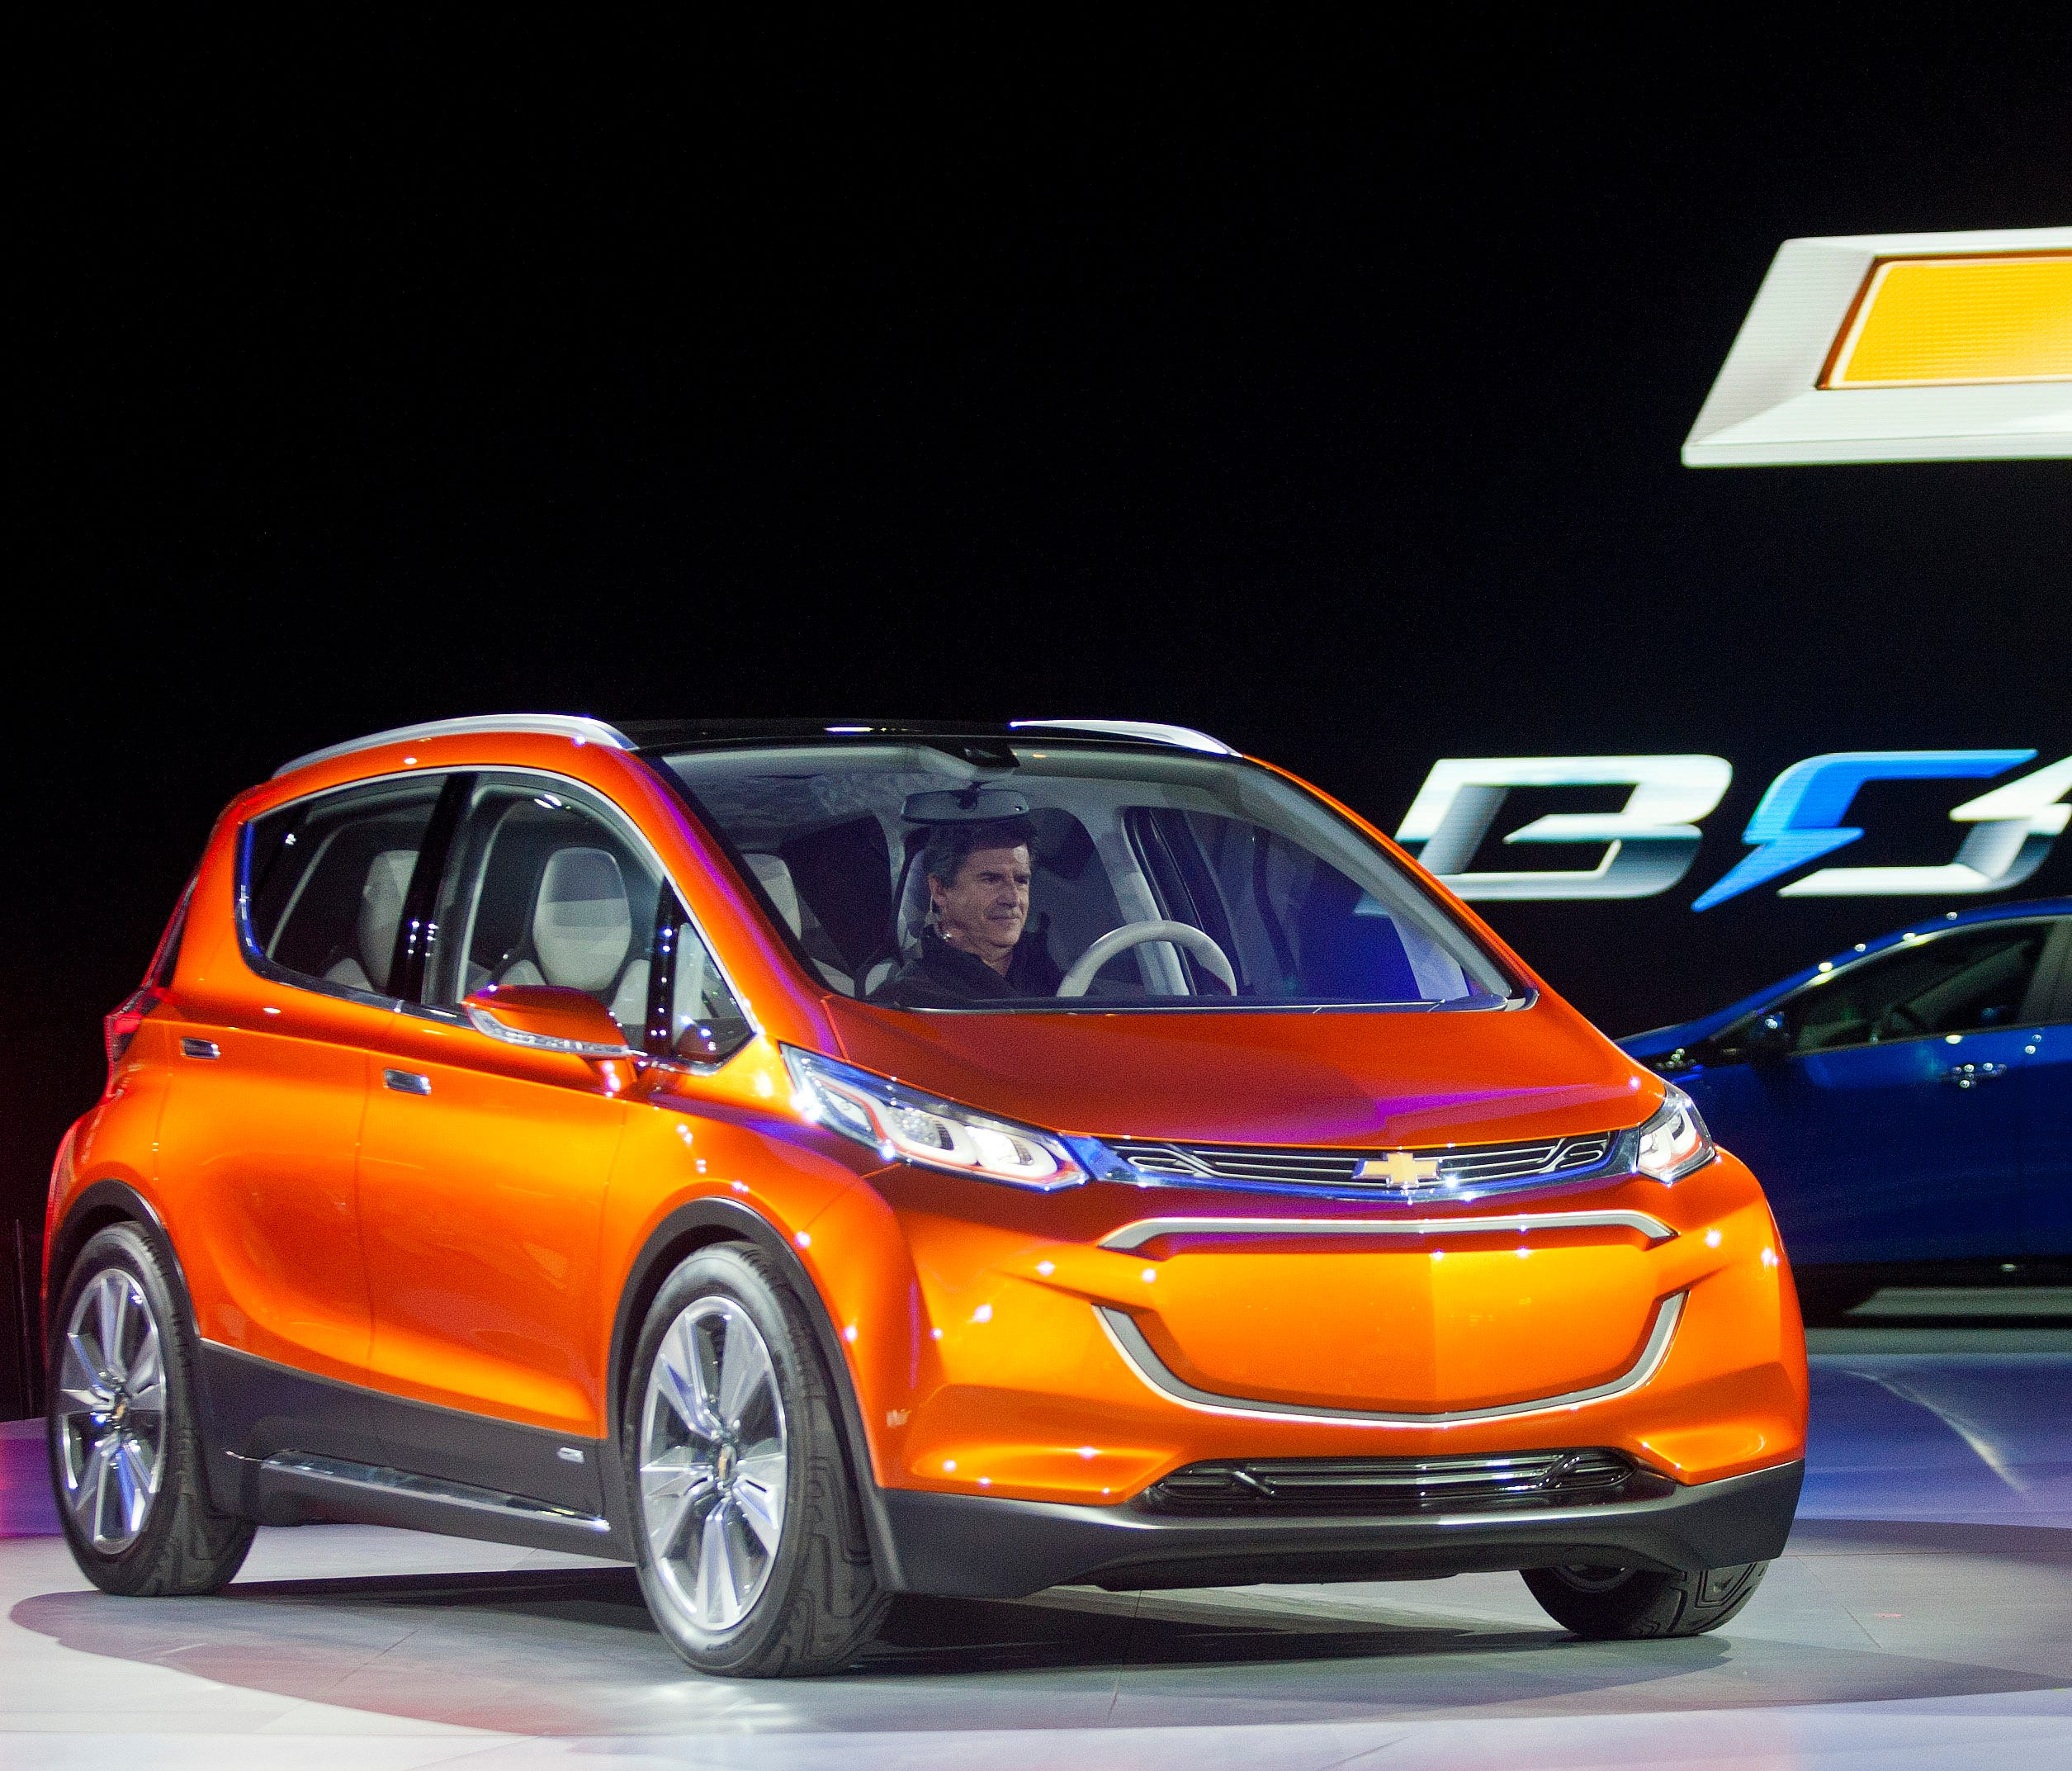 The Chevrolet Bolt EV electric concept vehicle has been named North American Car of the Year